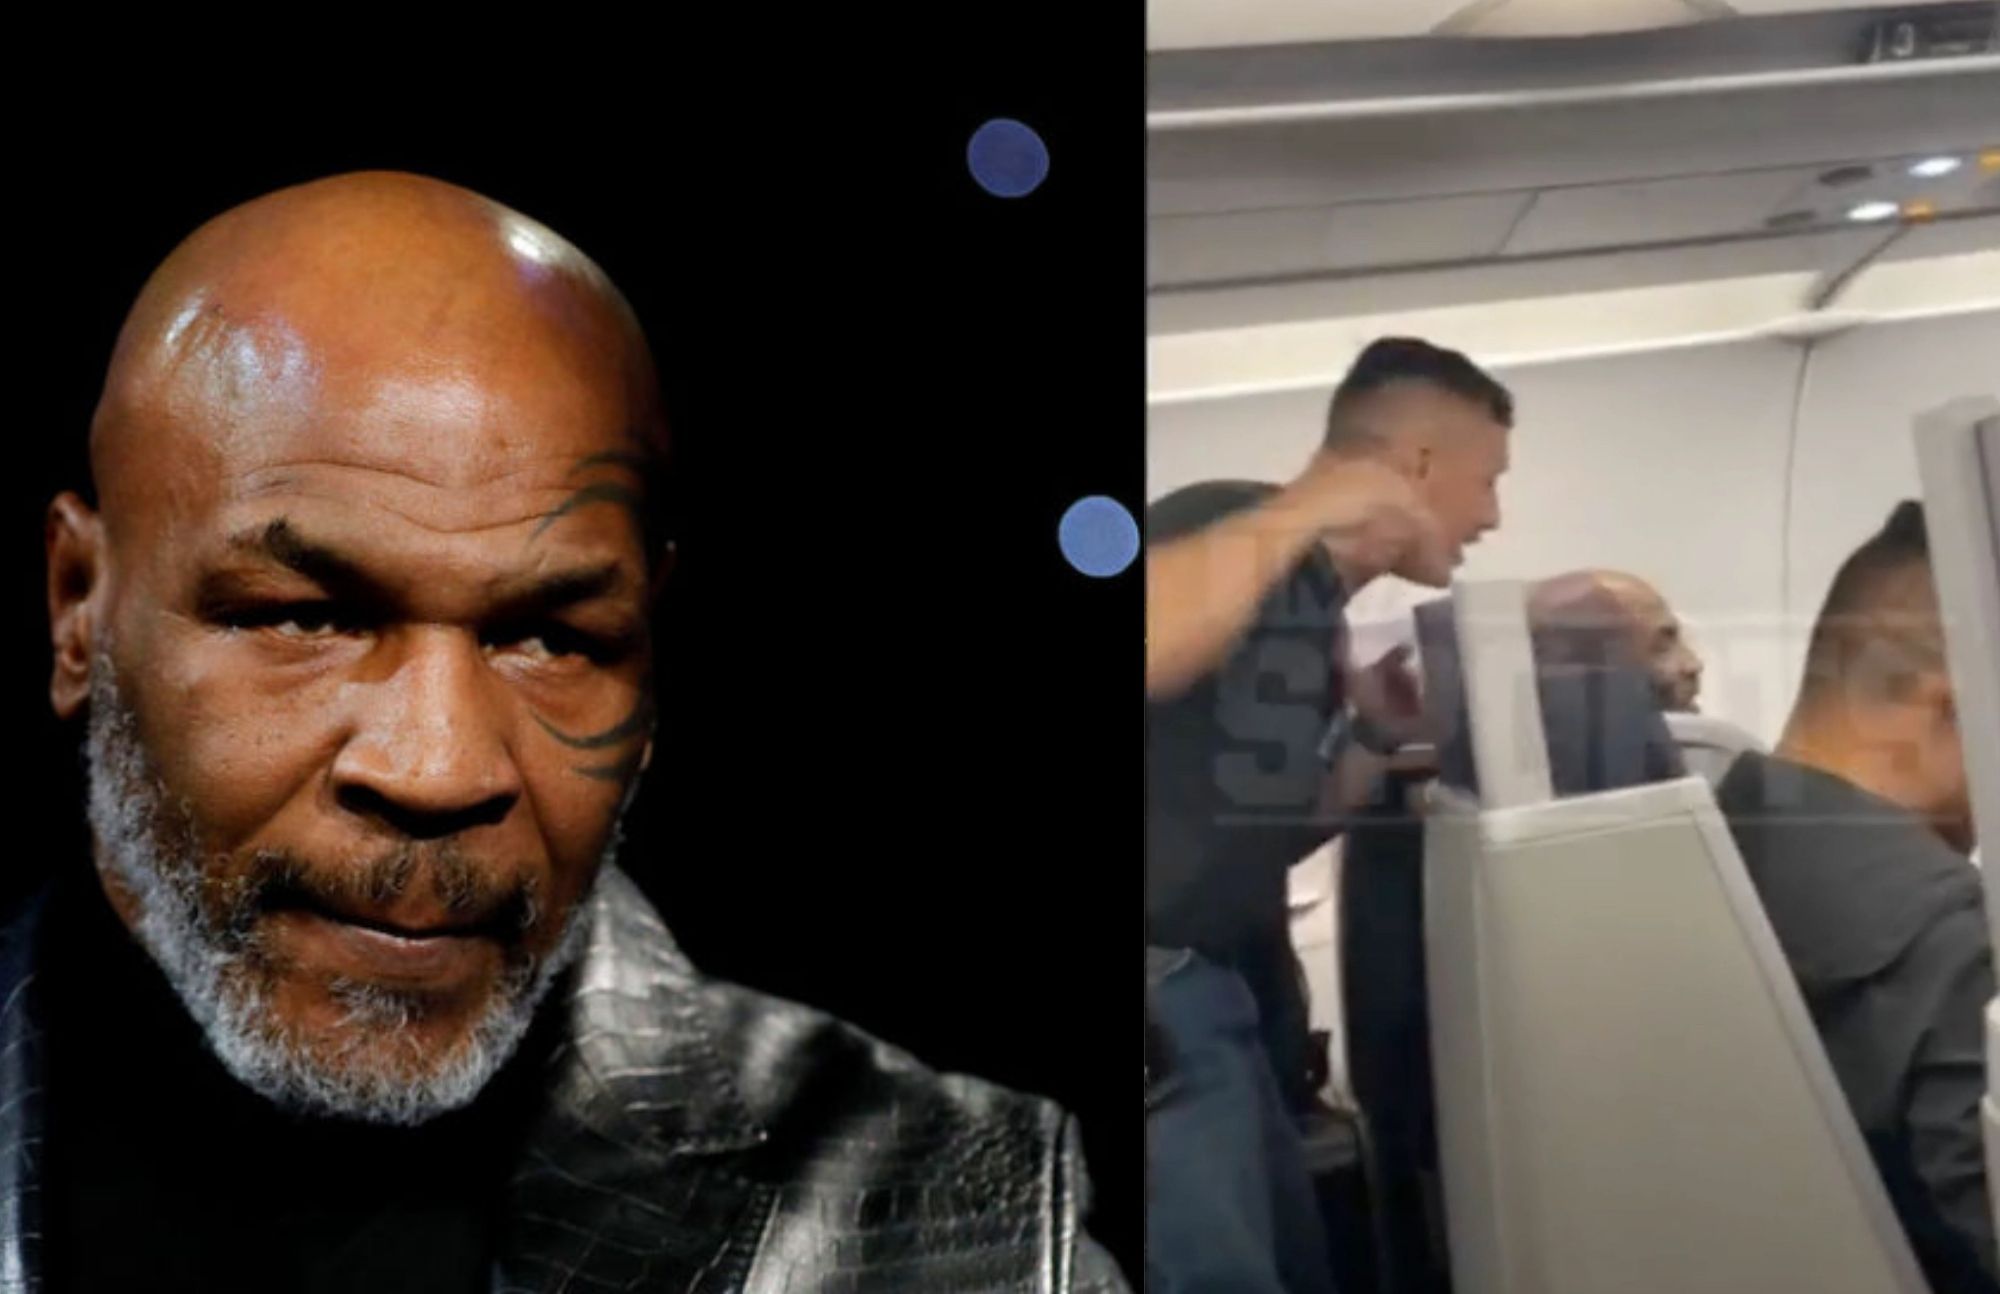 From Boxing Ring Into An Airplane Boxing Scene - Mike Tyson Filmed Punching A Drunk And Annoying Airline Passenger